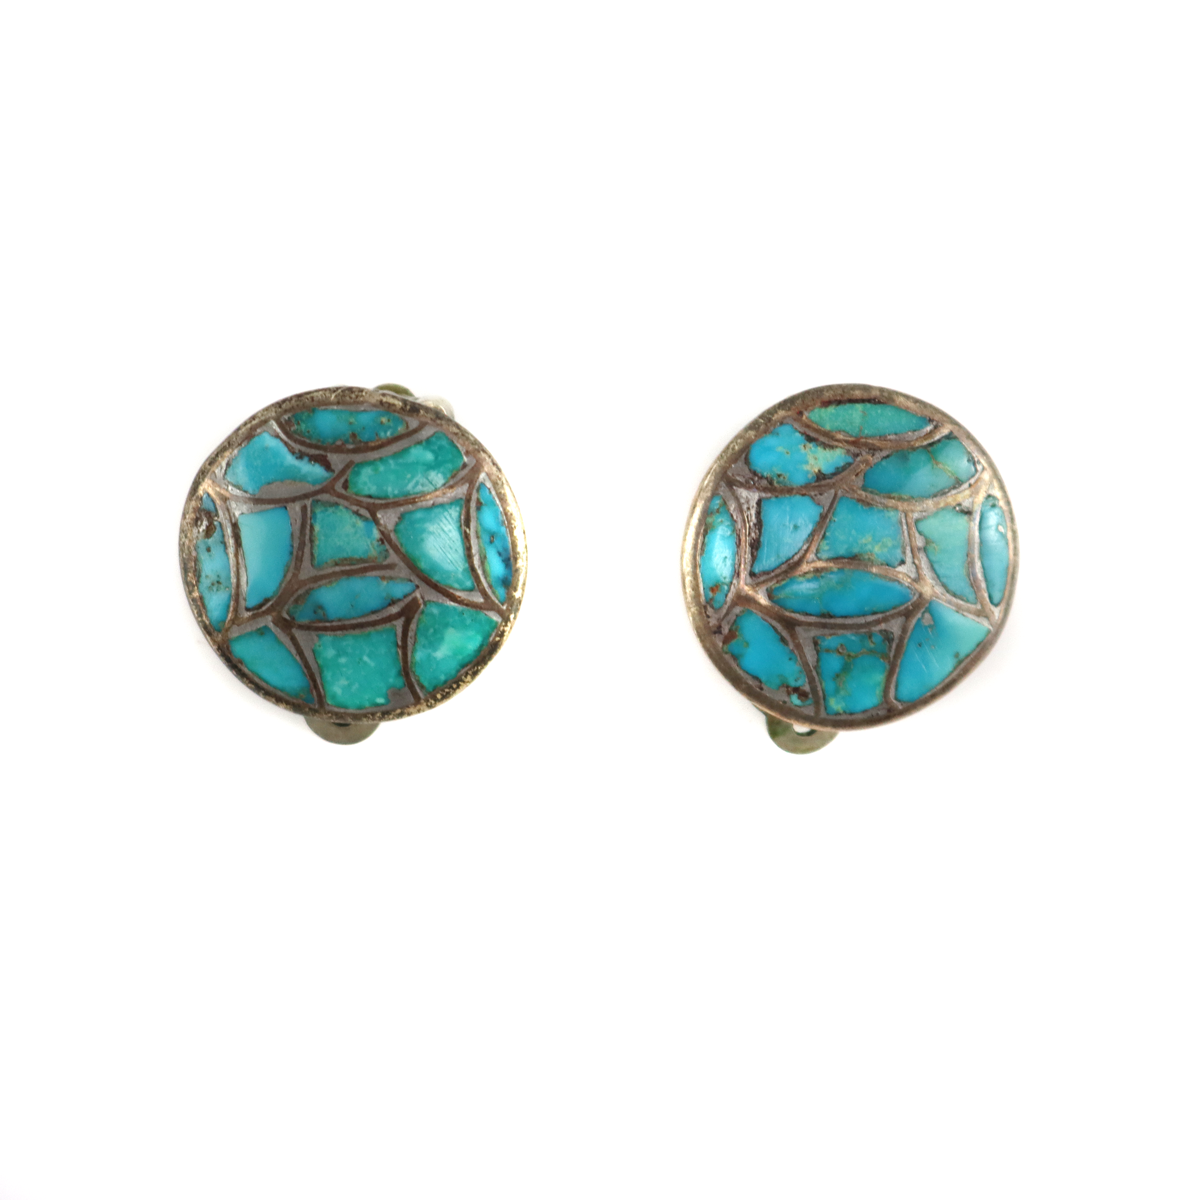 Zuni - Turquoise Channel Inlay and Silver Clip-on Earrings c. 1950s, 0.75" diameter (J91024-1023-001)